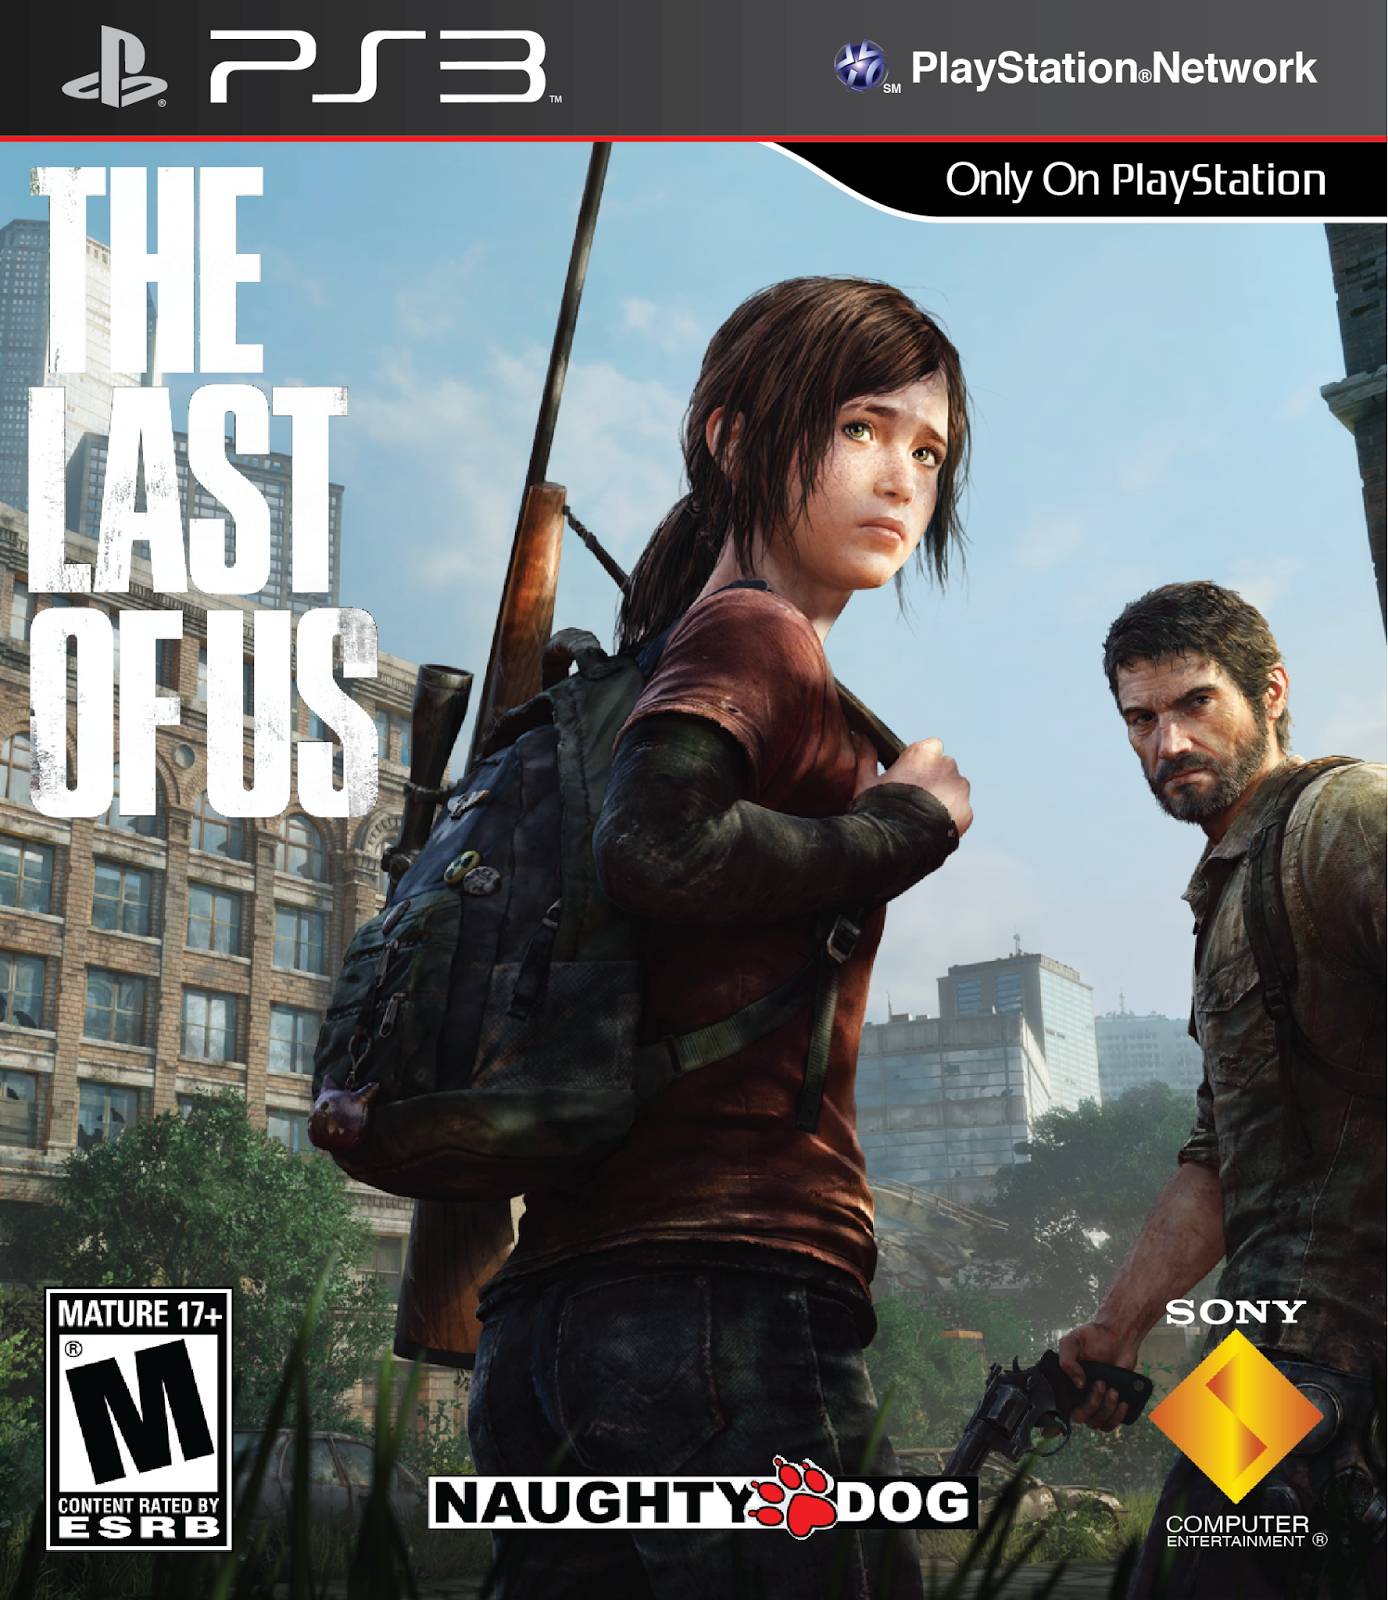 Last 3 игра. The last of us на пс3. The last of us ps3. Игра ps3 last of us. Ps3 версия the last of us.